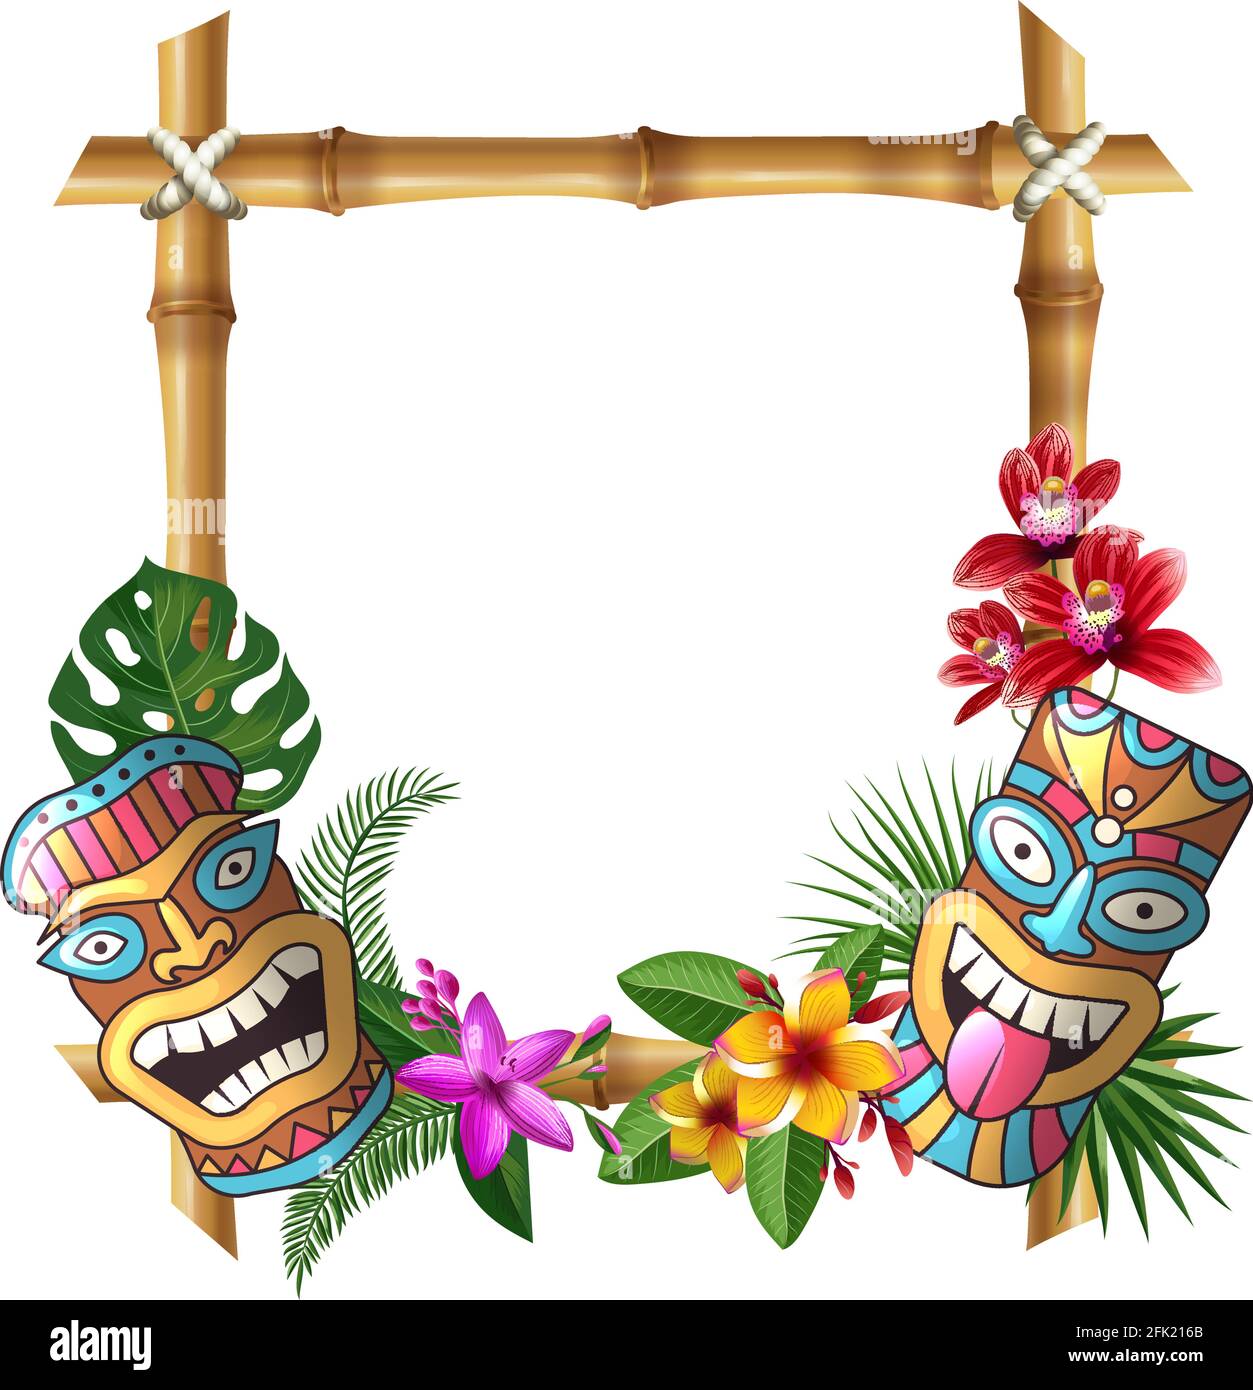 Tiki mask and frame. Hawaii authentic background bamboo square sticks exotic flowers and plants wooden totem vector cultural object Stock Vector